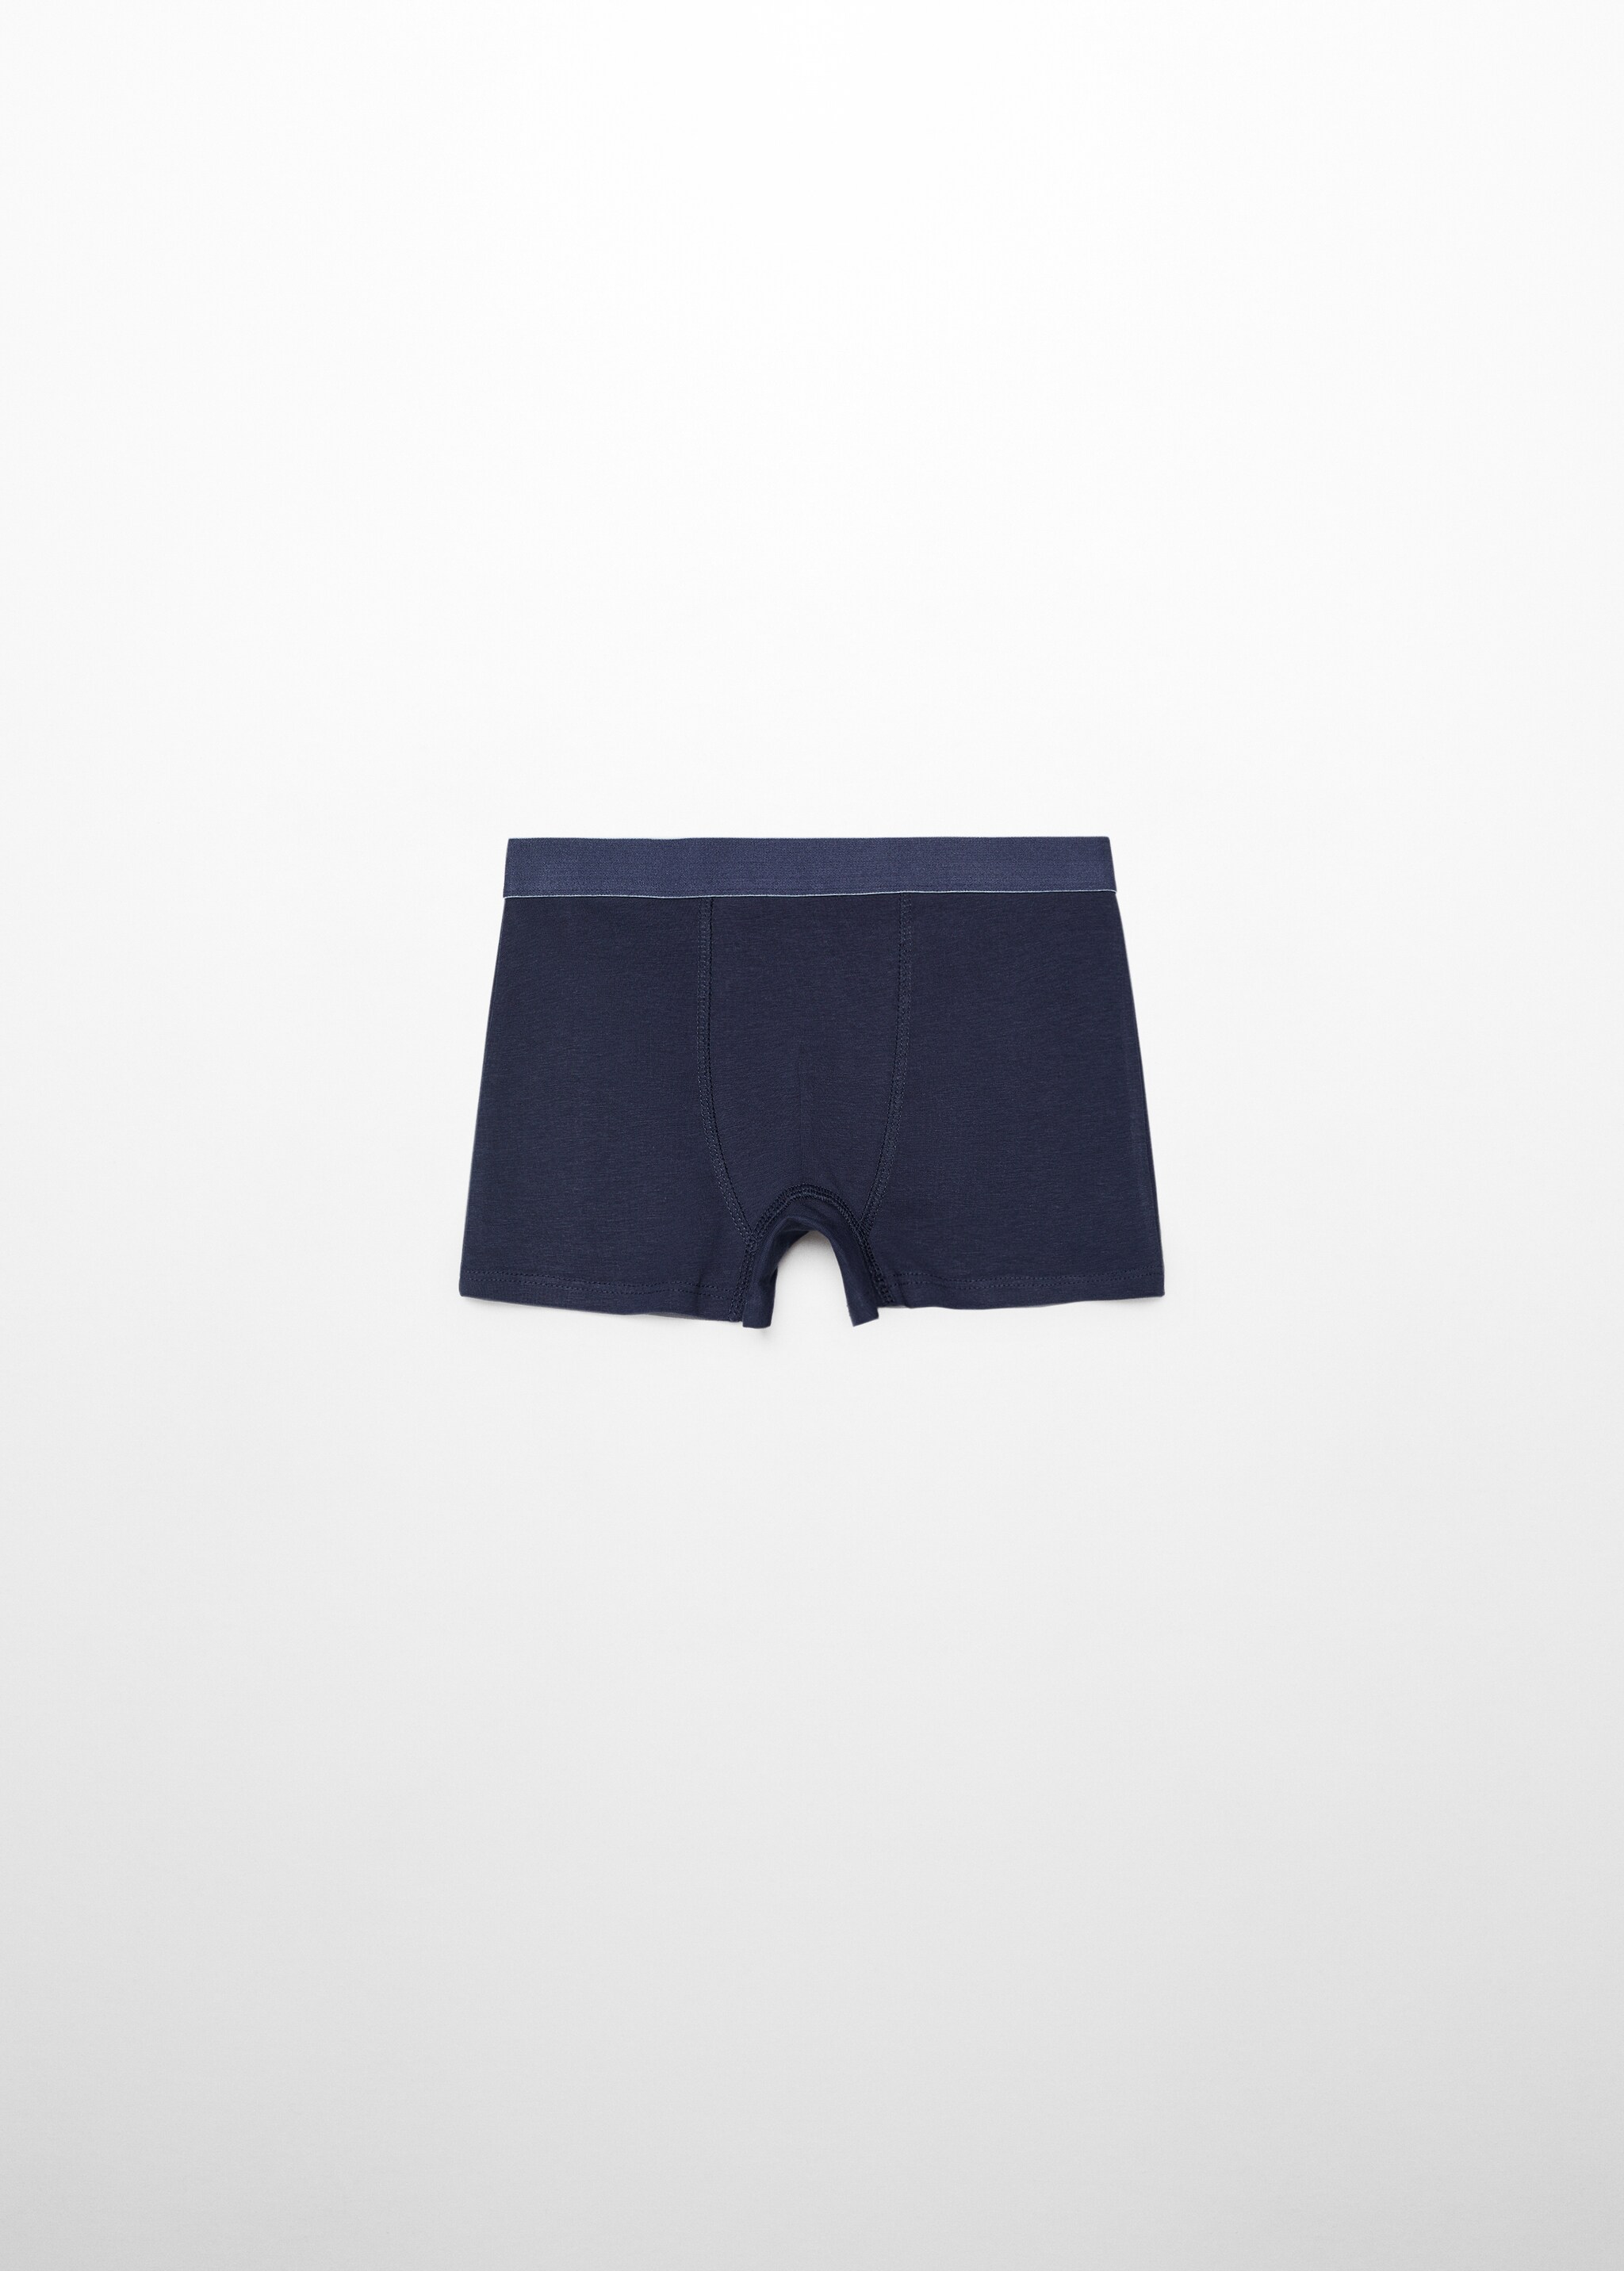 Printed boxer shorts 3 pack - Details of the article 0